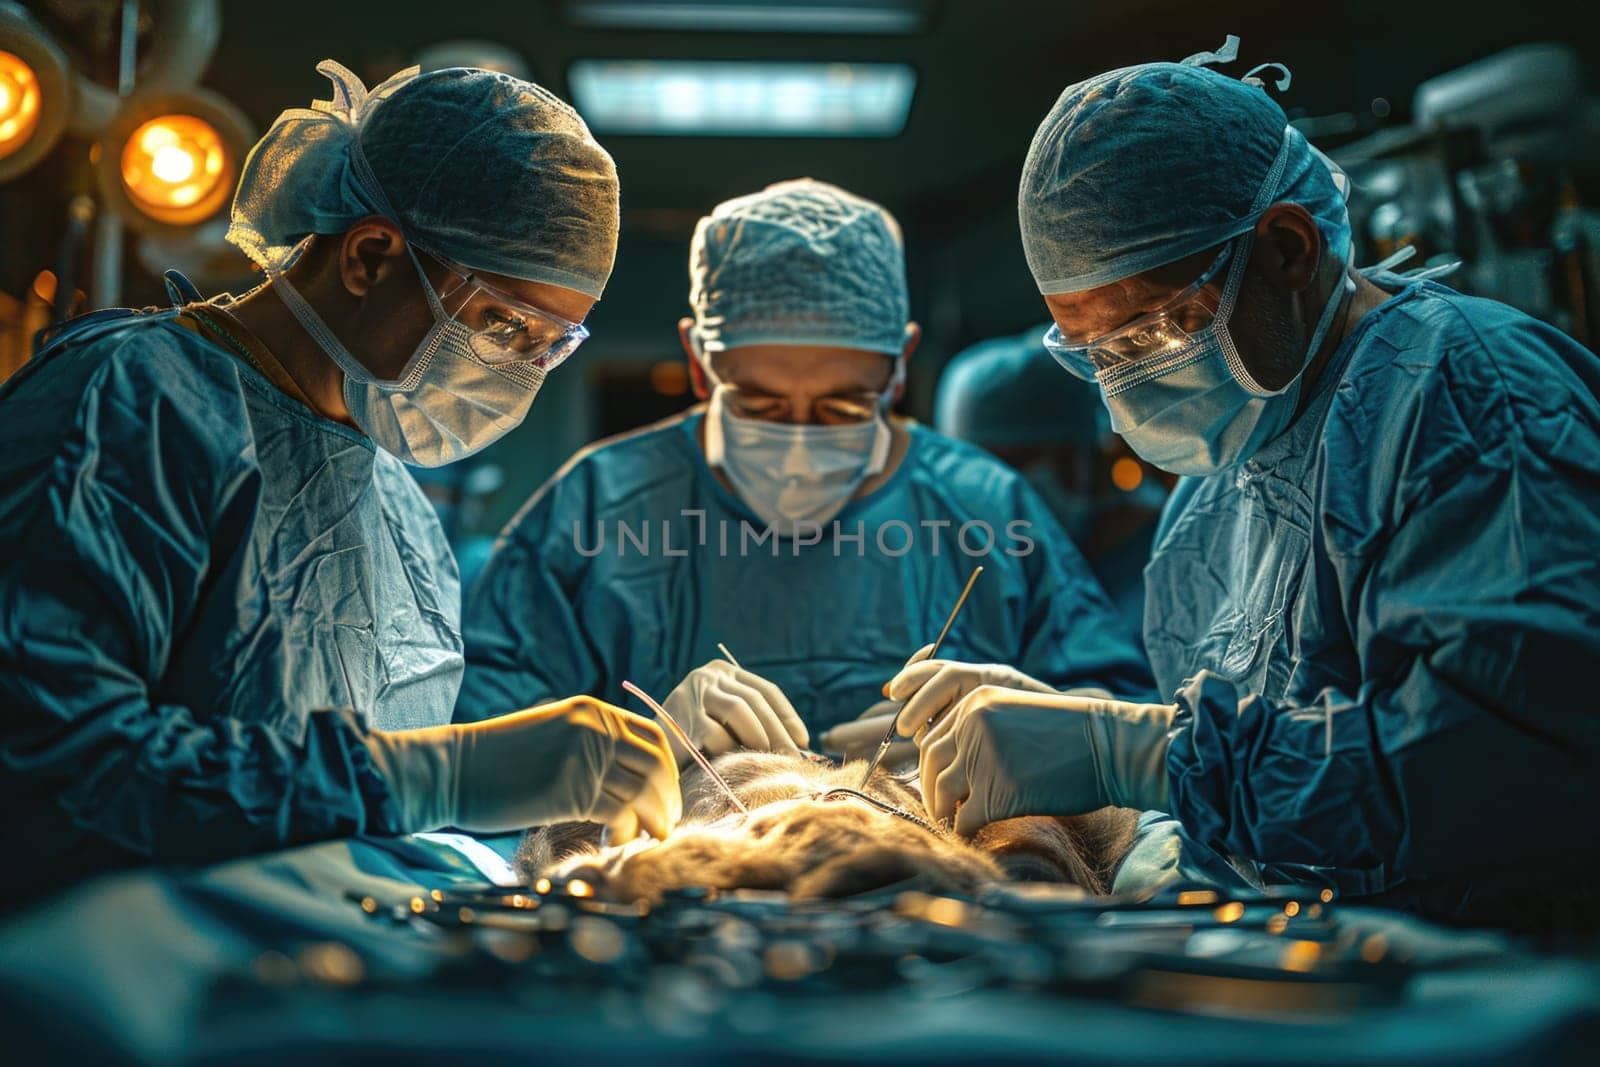 Surgery for an animal: doctors take care of the patient's health by Yurich32